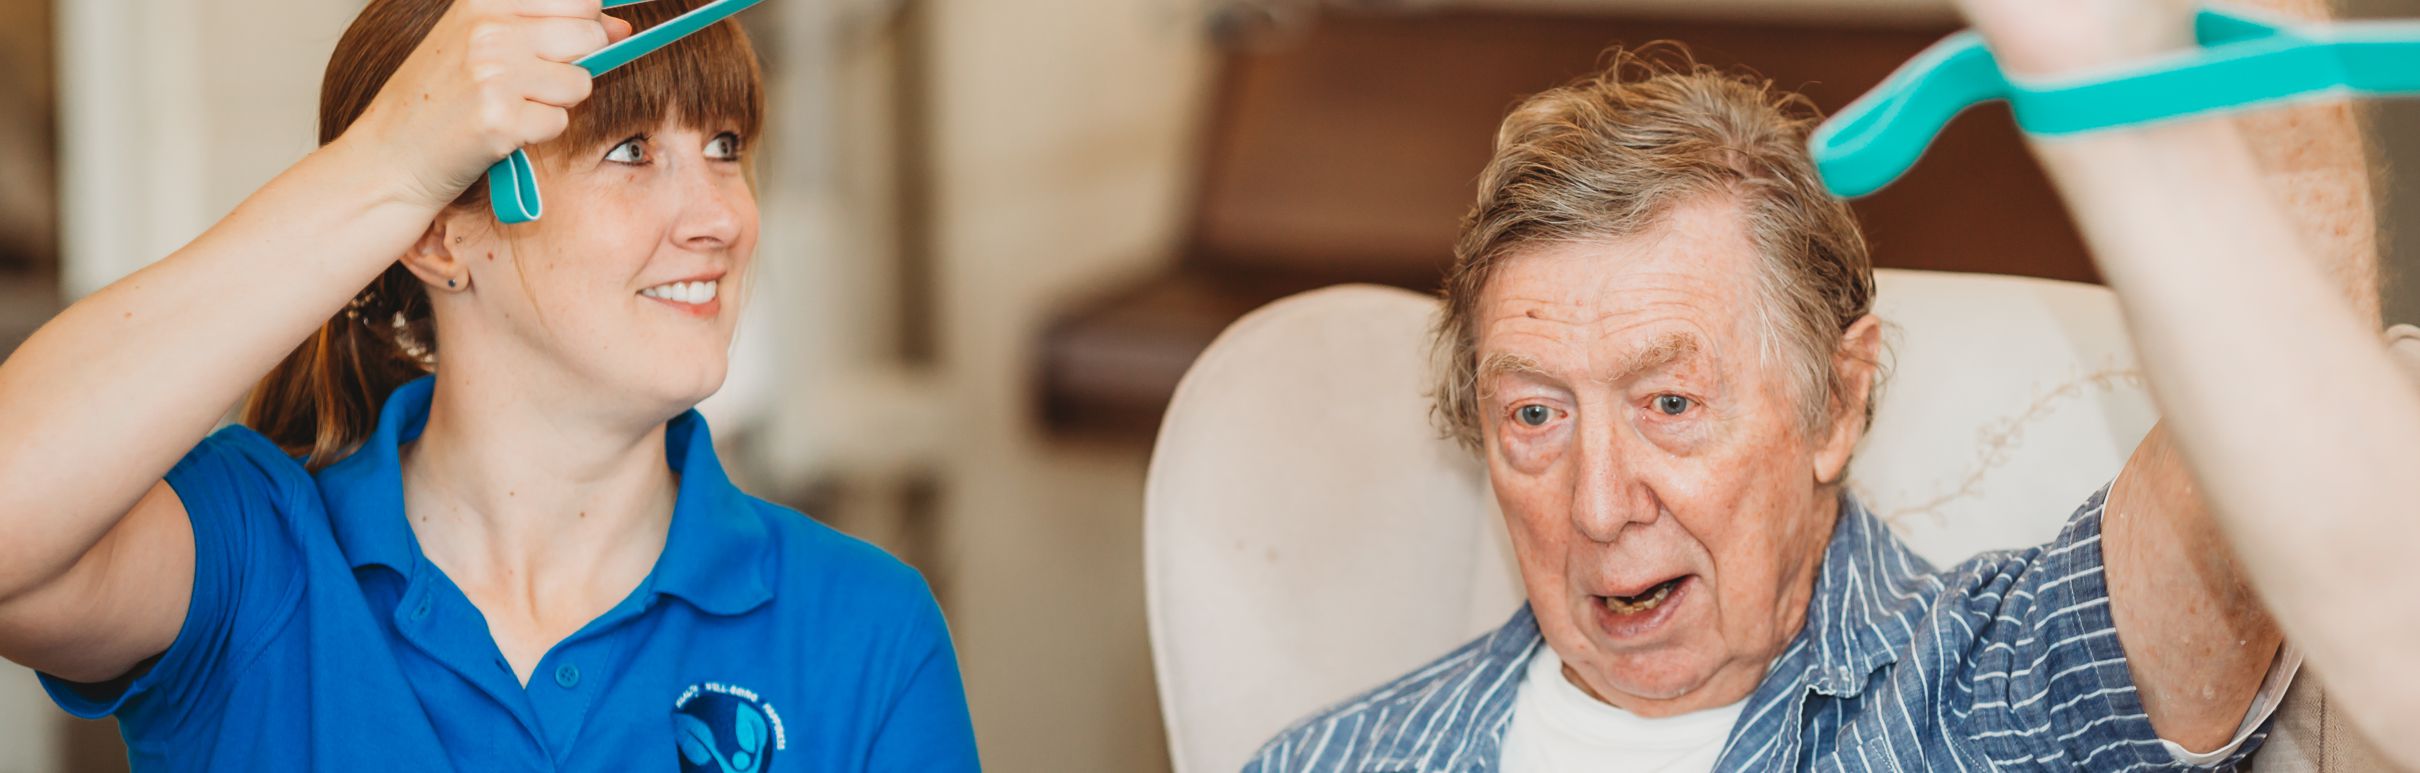 Dementia Care from The Good Therapy Group